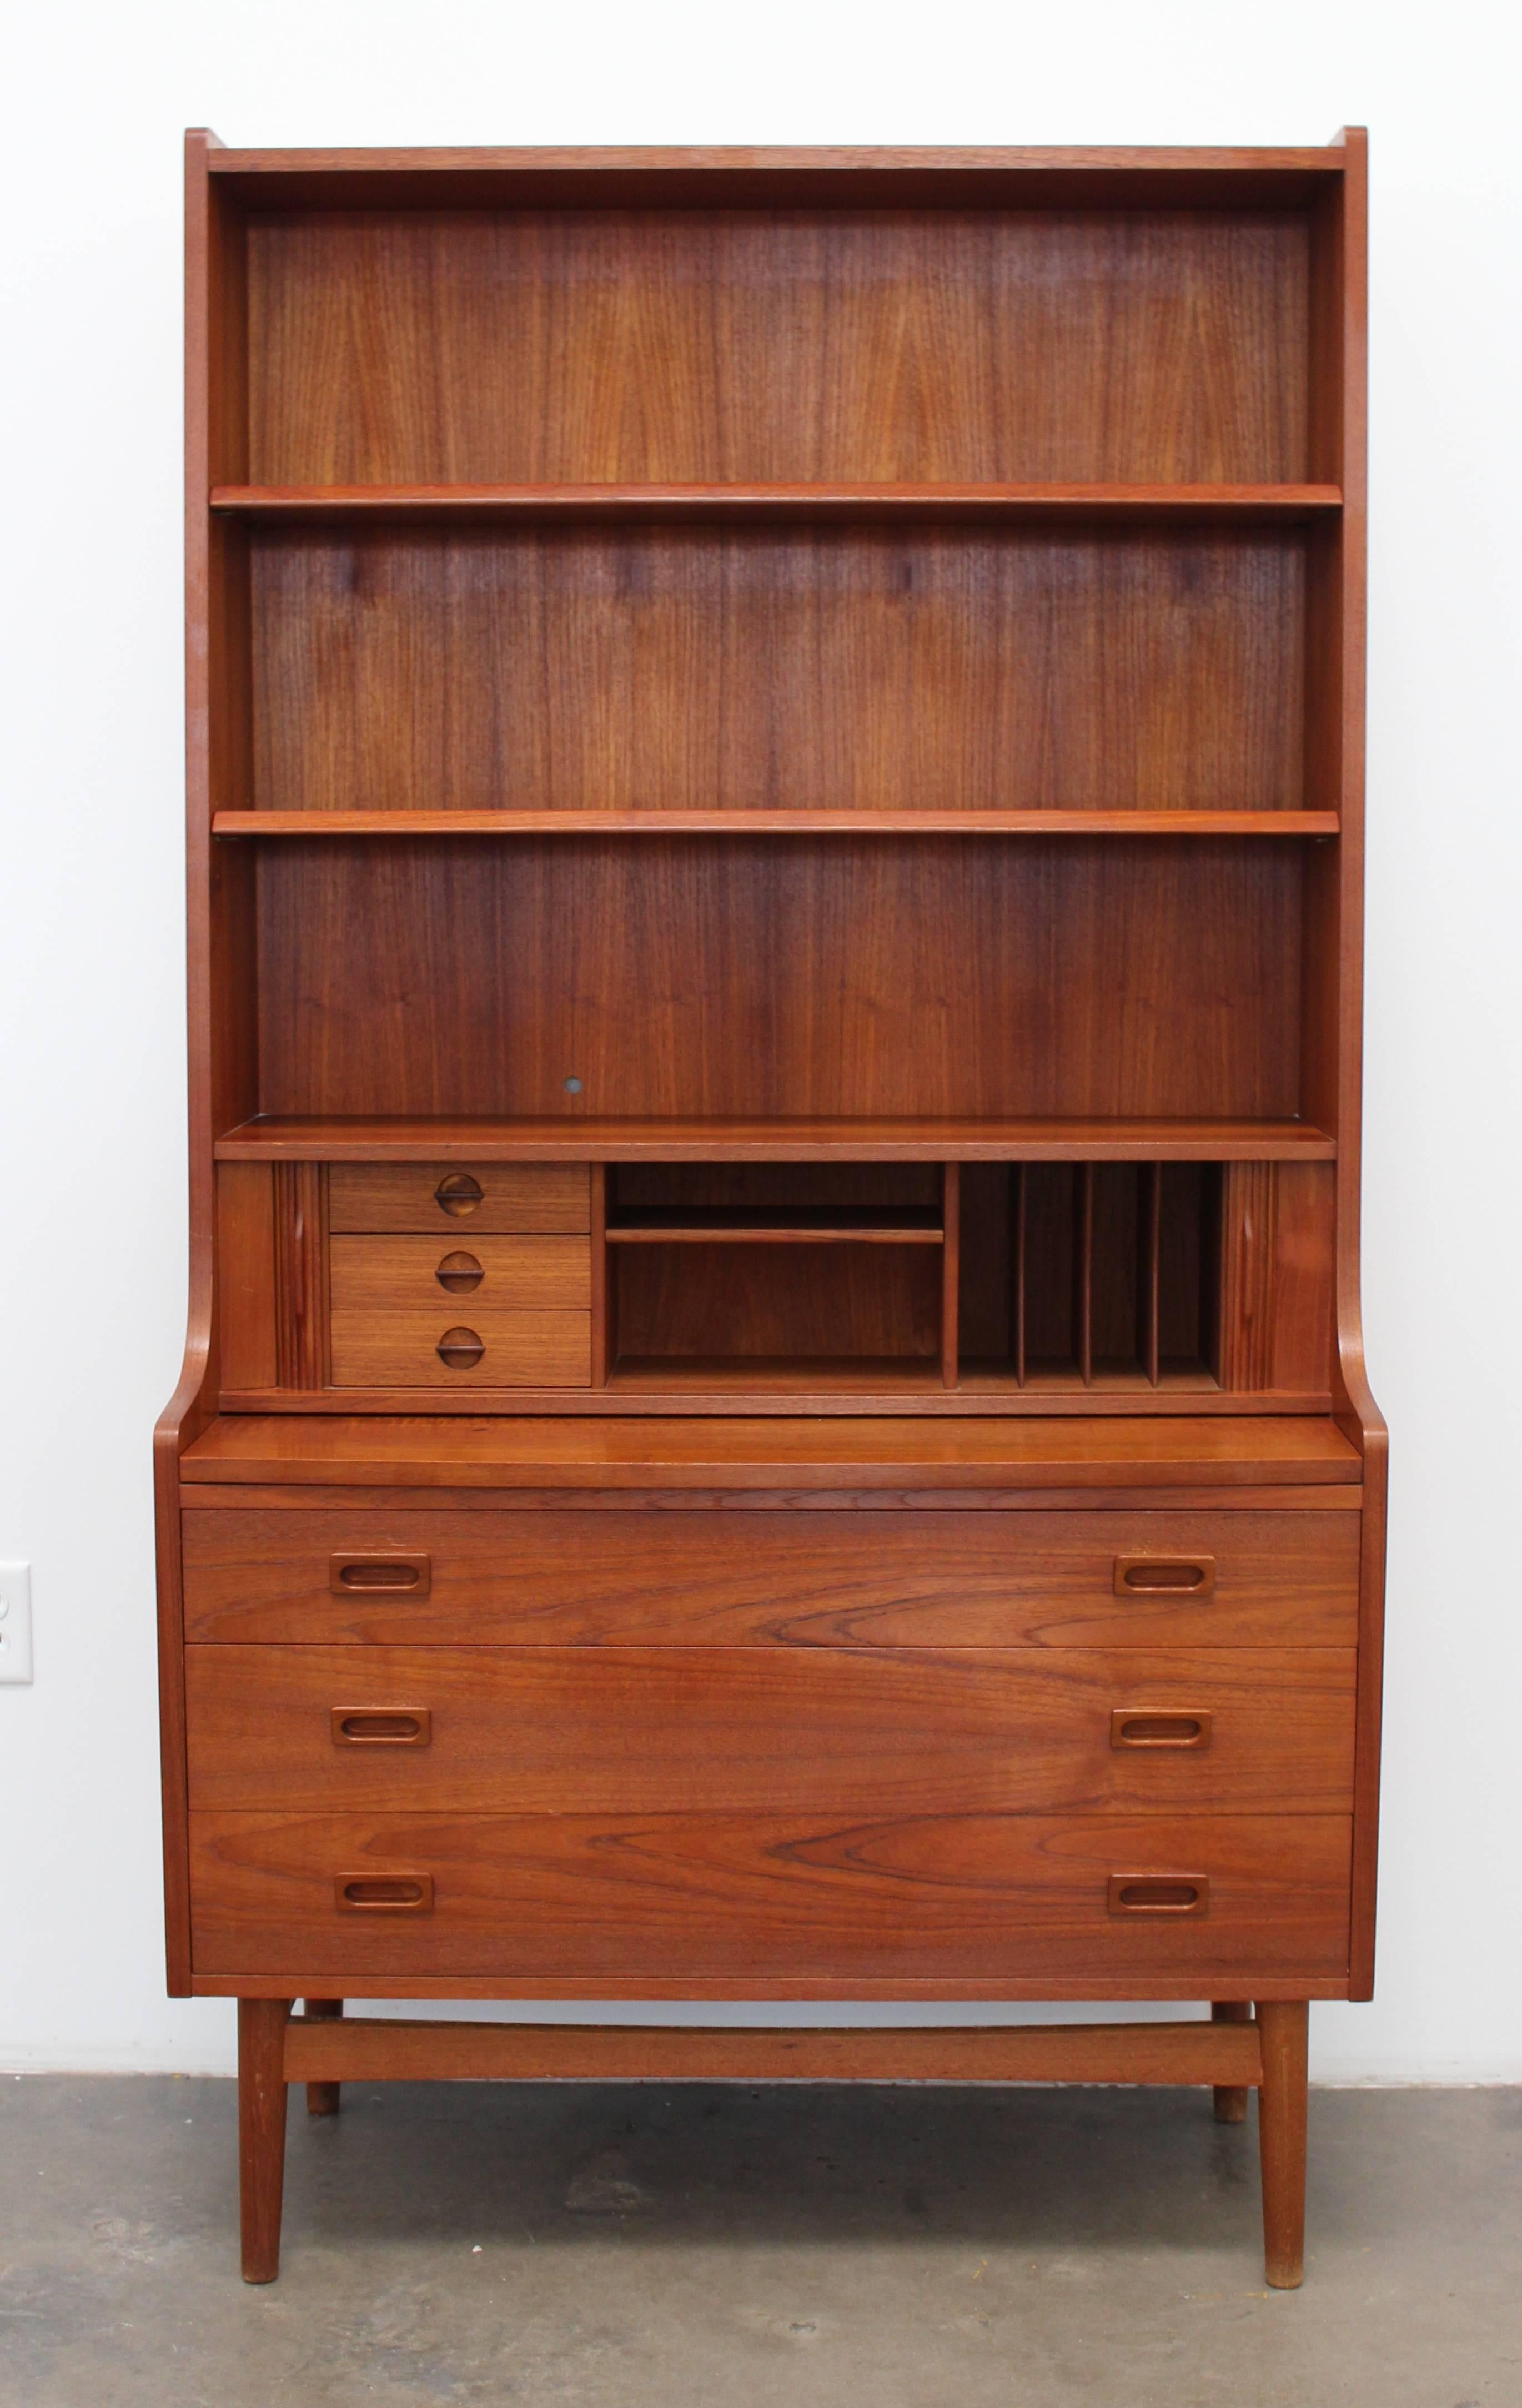 Tall bookcase or secretary unit designed by Johannes Sorth for Nexø Møbelfabrik made of teak. This item is extremely versatile and can work in a bedroom, home office, traditional office or living room. The upper portion of the shelf contains 3